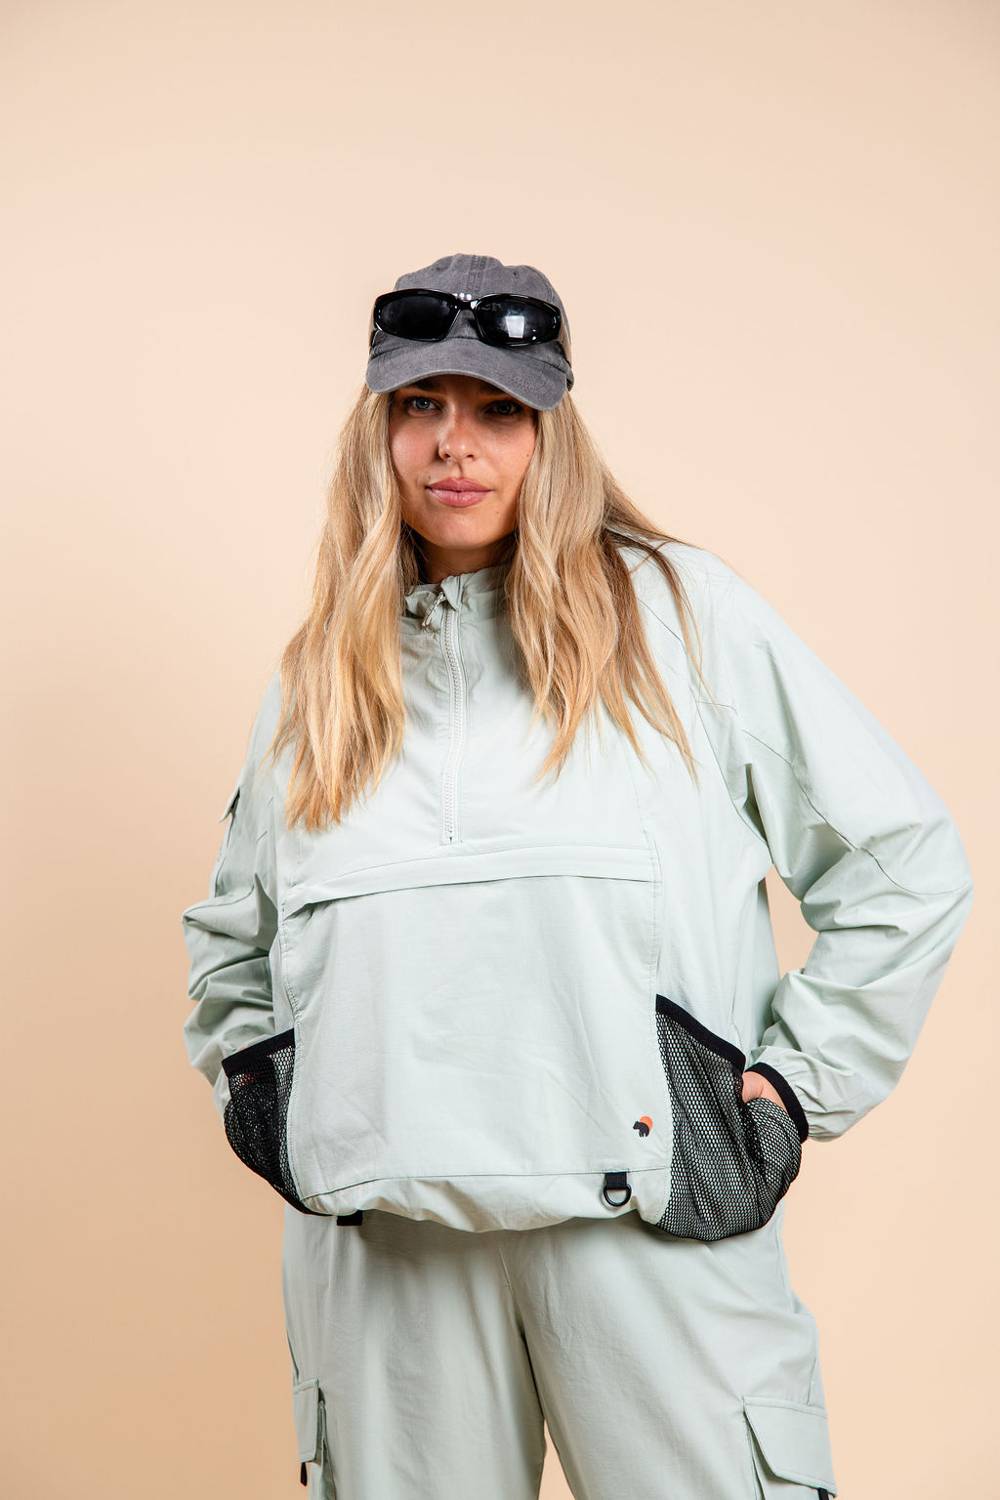 Blonde woman in mint green lightweight jacket with pockets and dad hat with sunglasses